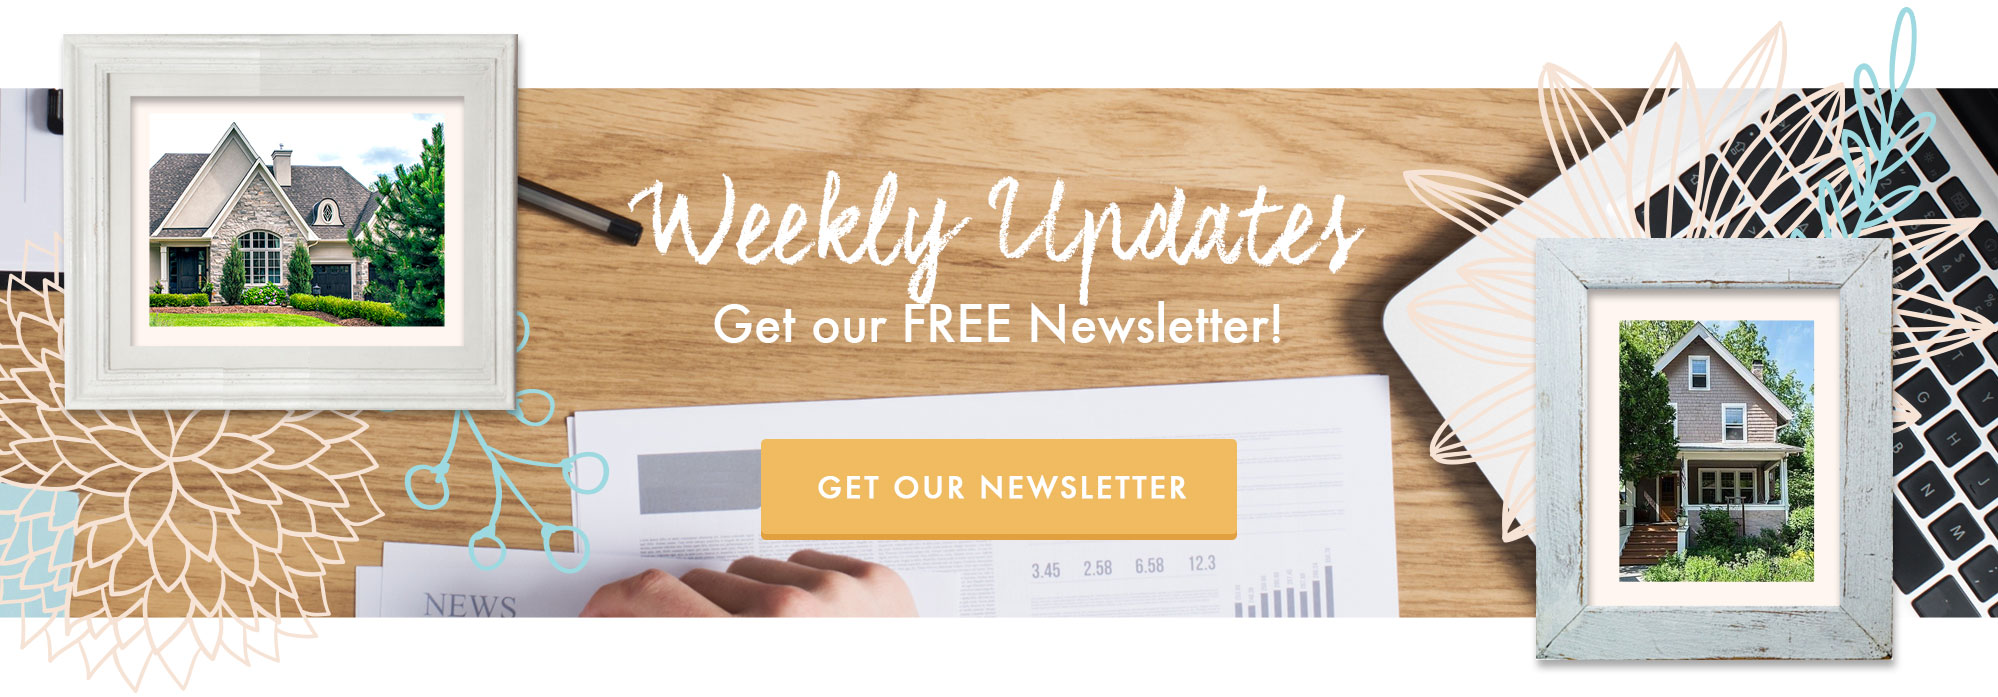 Weekly Updates - Subscribe to our Newsletter